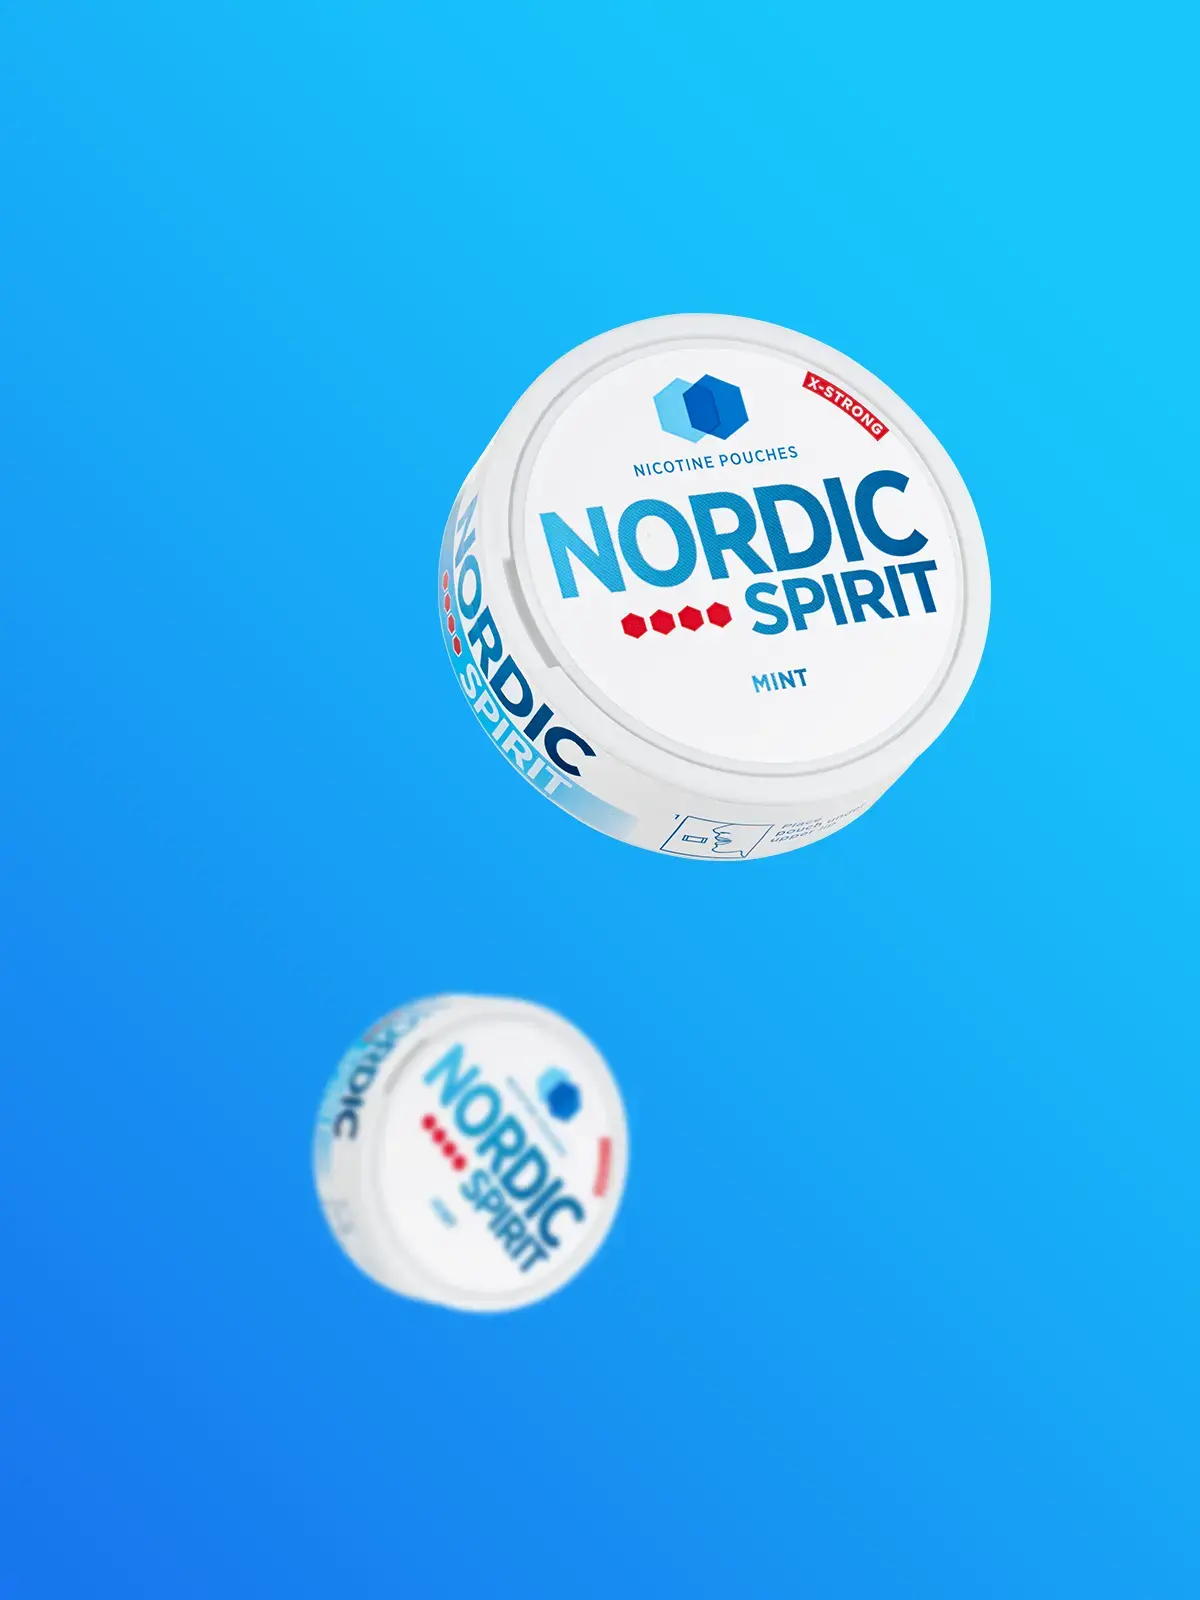 Two packs of Nordic Spirit in Mint flavour floating in front of a blue background